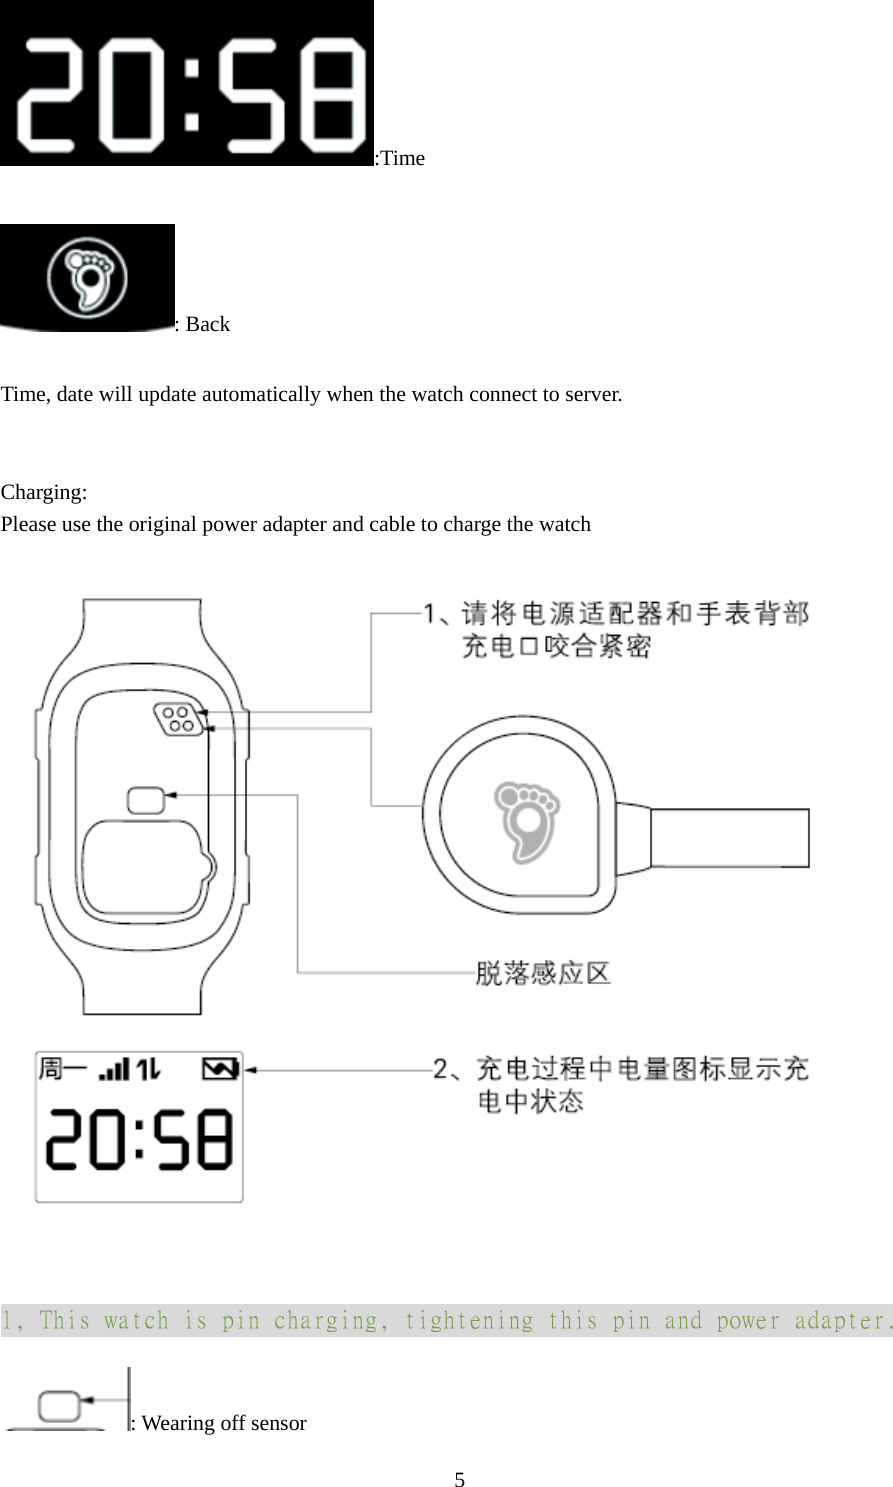   5:Time  : Back  Time, date will update automatically when the watch connect to server.   Charging: Please use the original power adapter and cable to charge the watch   1, This watch is pin charging, tightening this pin and power adapter. : Wearing off sensor 